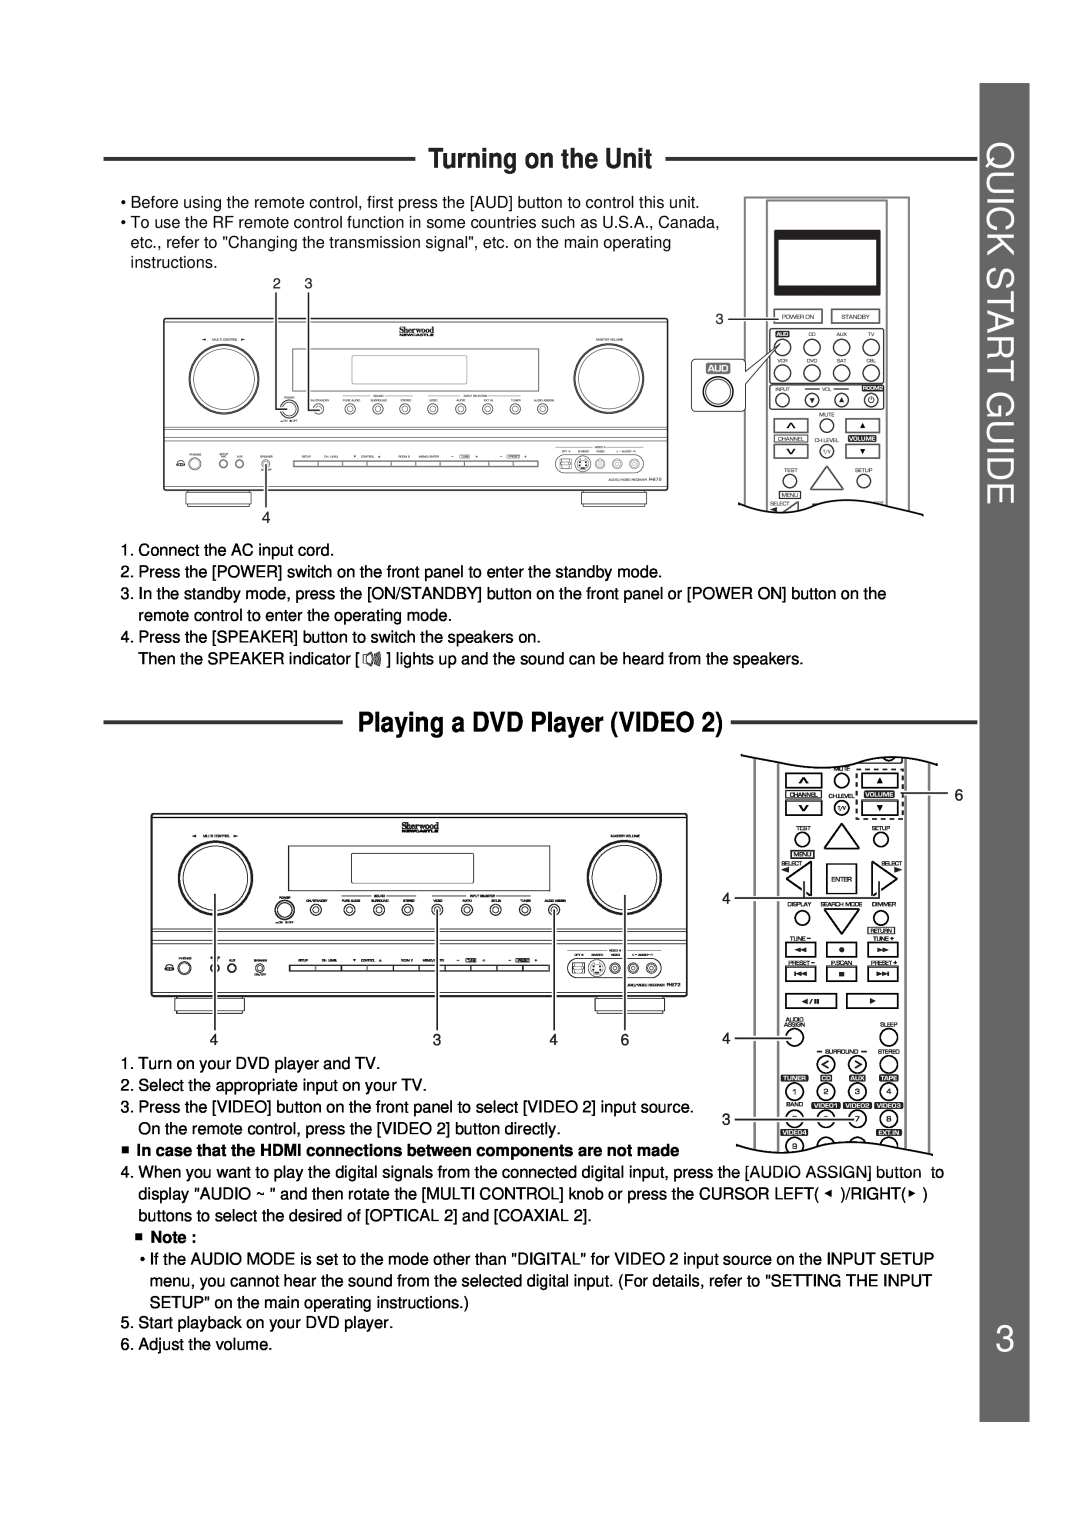 Sherwood 5227-00000-041-0S quick start Start Guide, Playing a DVD Player VIDEO, Turning on the Unit 